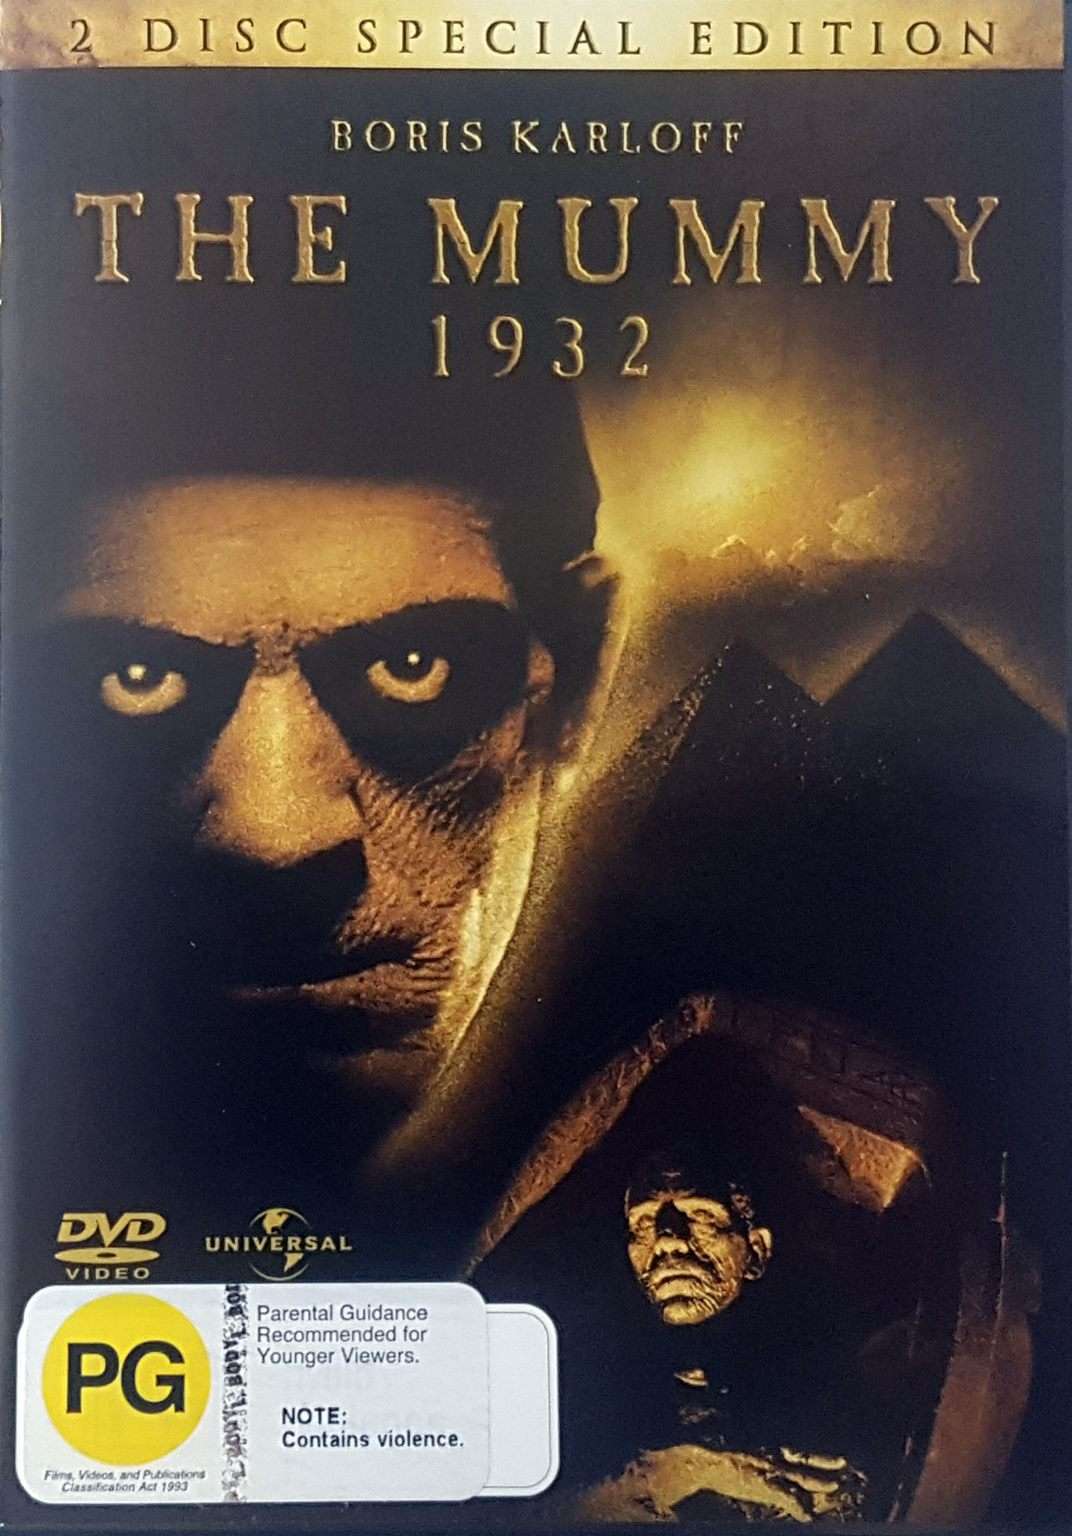 The Mummy 1932 2 Disc Special Edition